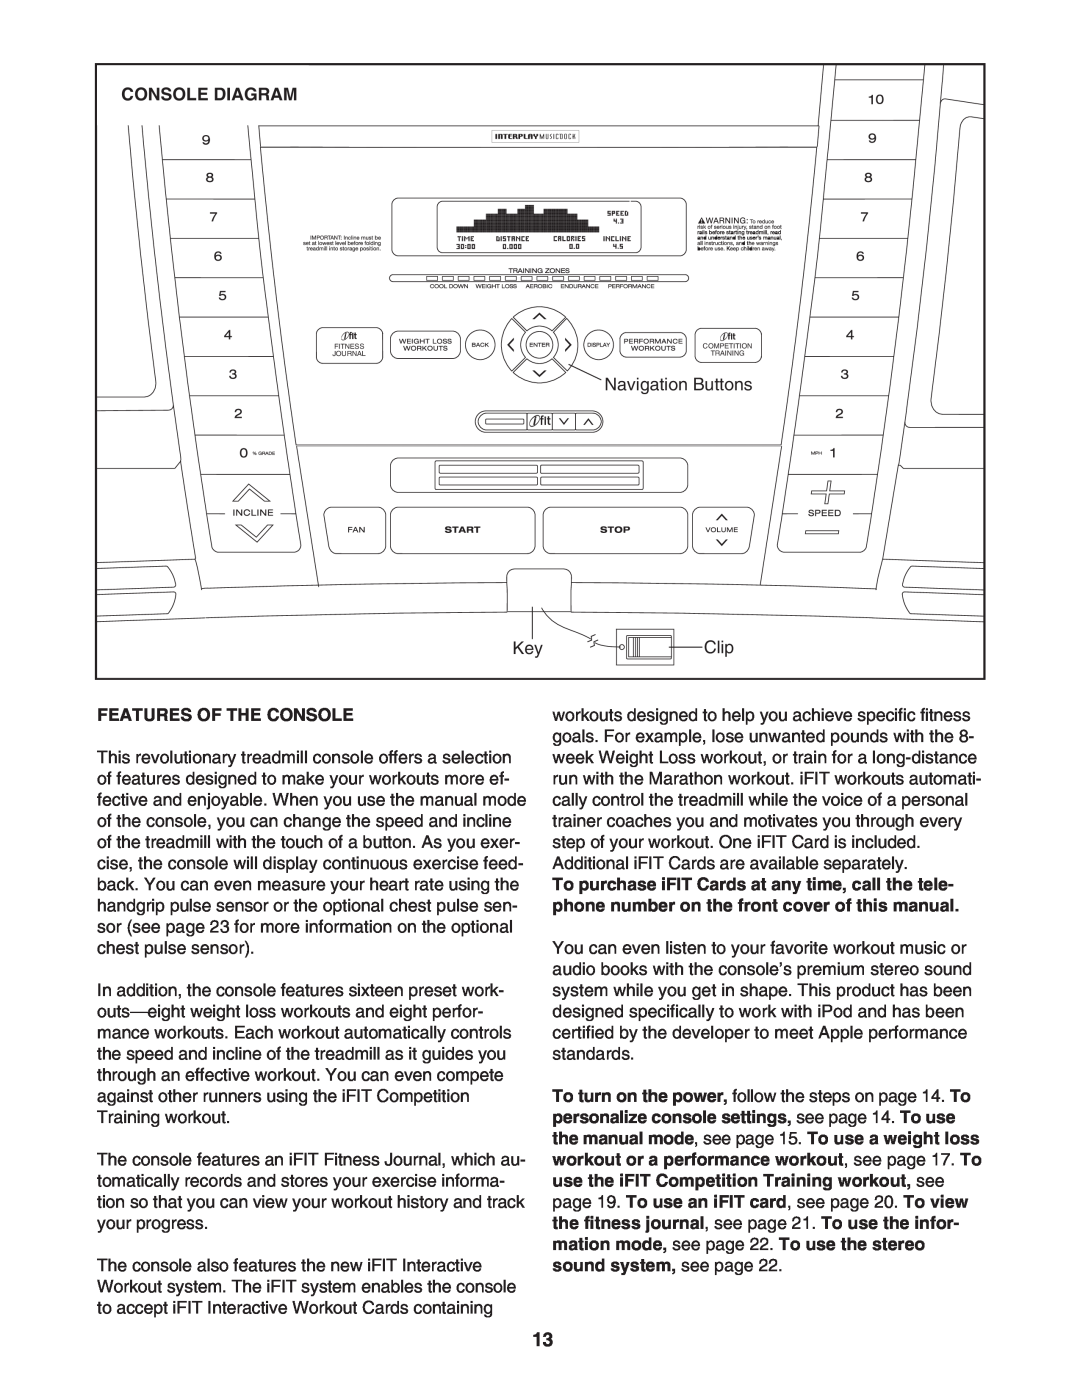 NordicTrack NTL09007.0 user manual Console Diagram, Features Of The Console 